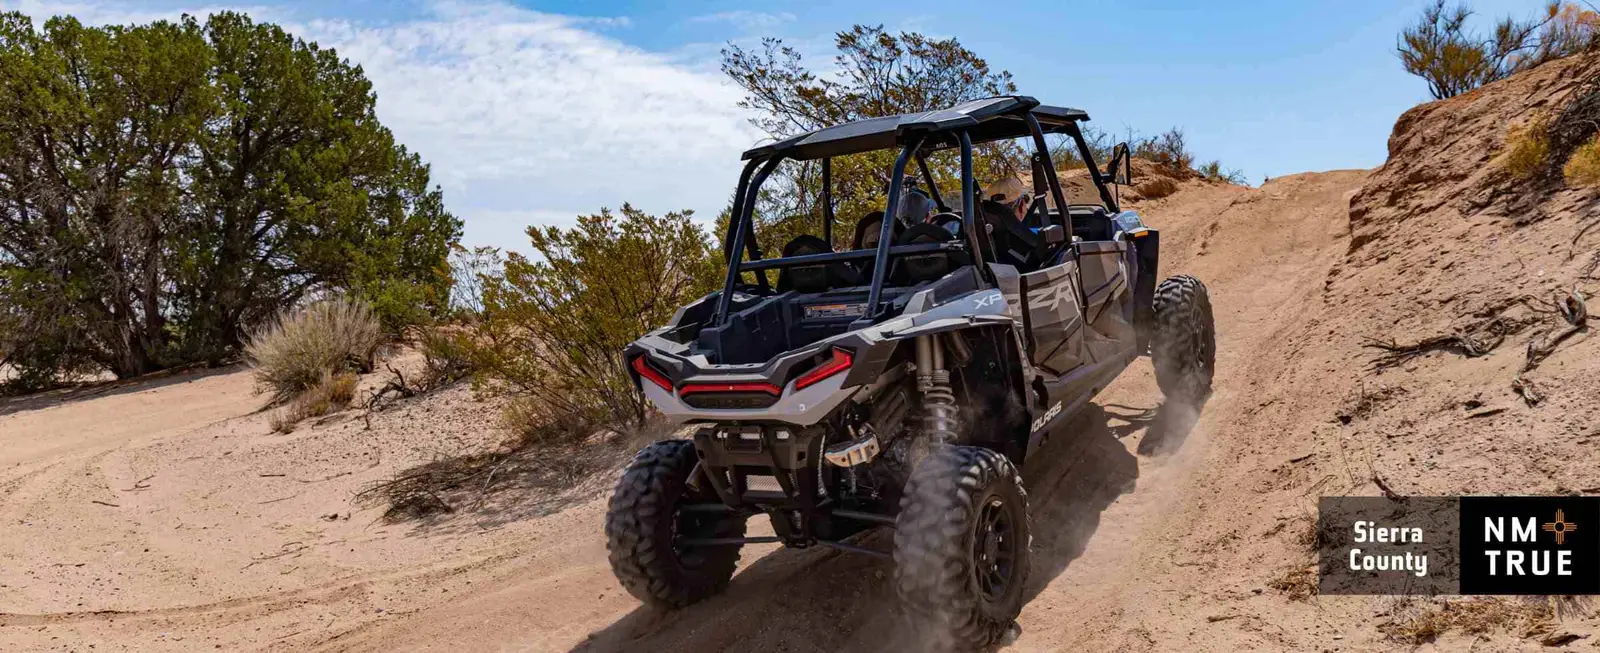 atv trails in sierra county new mexico